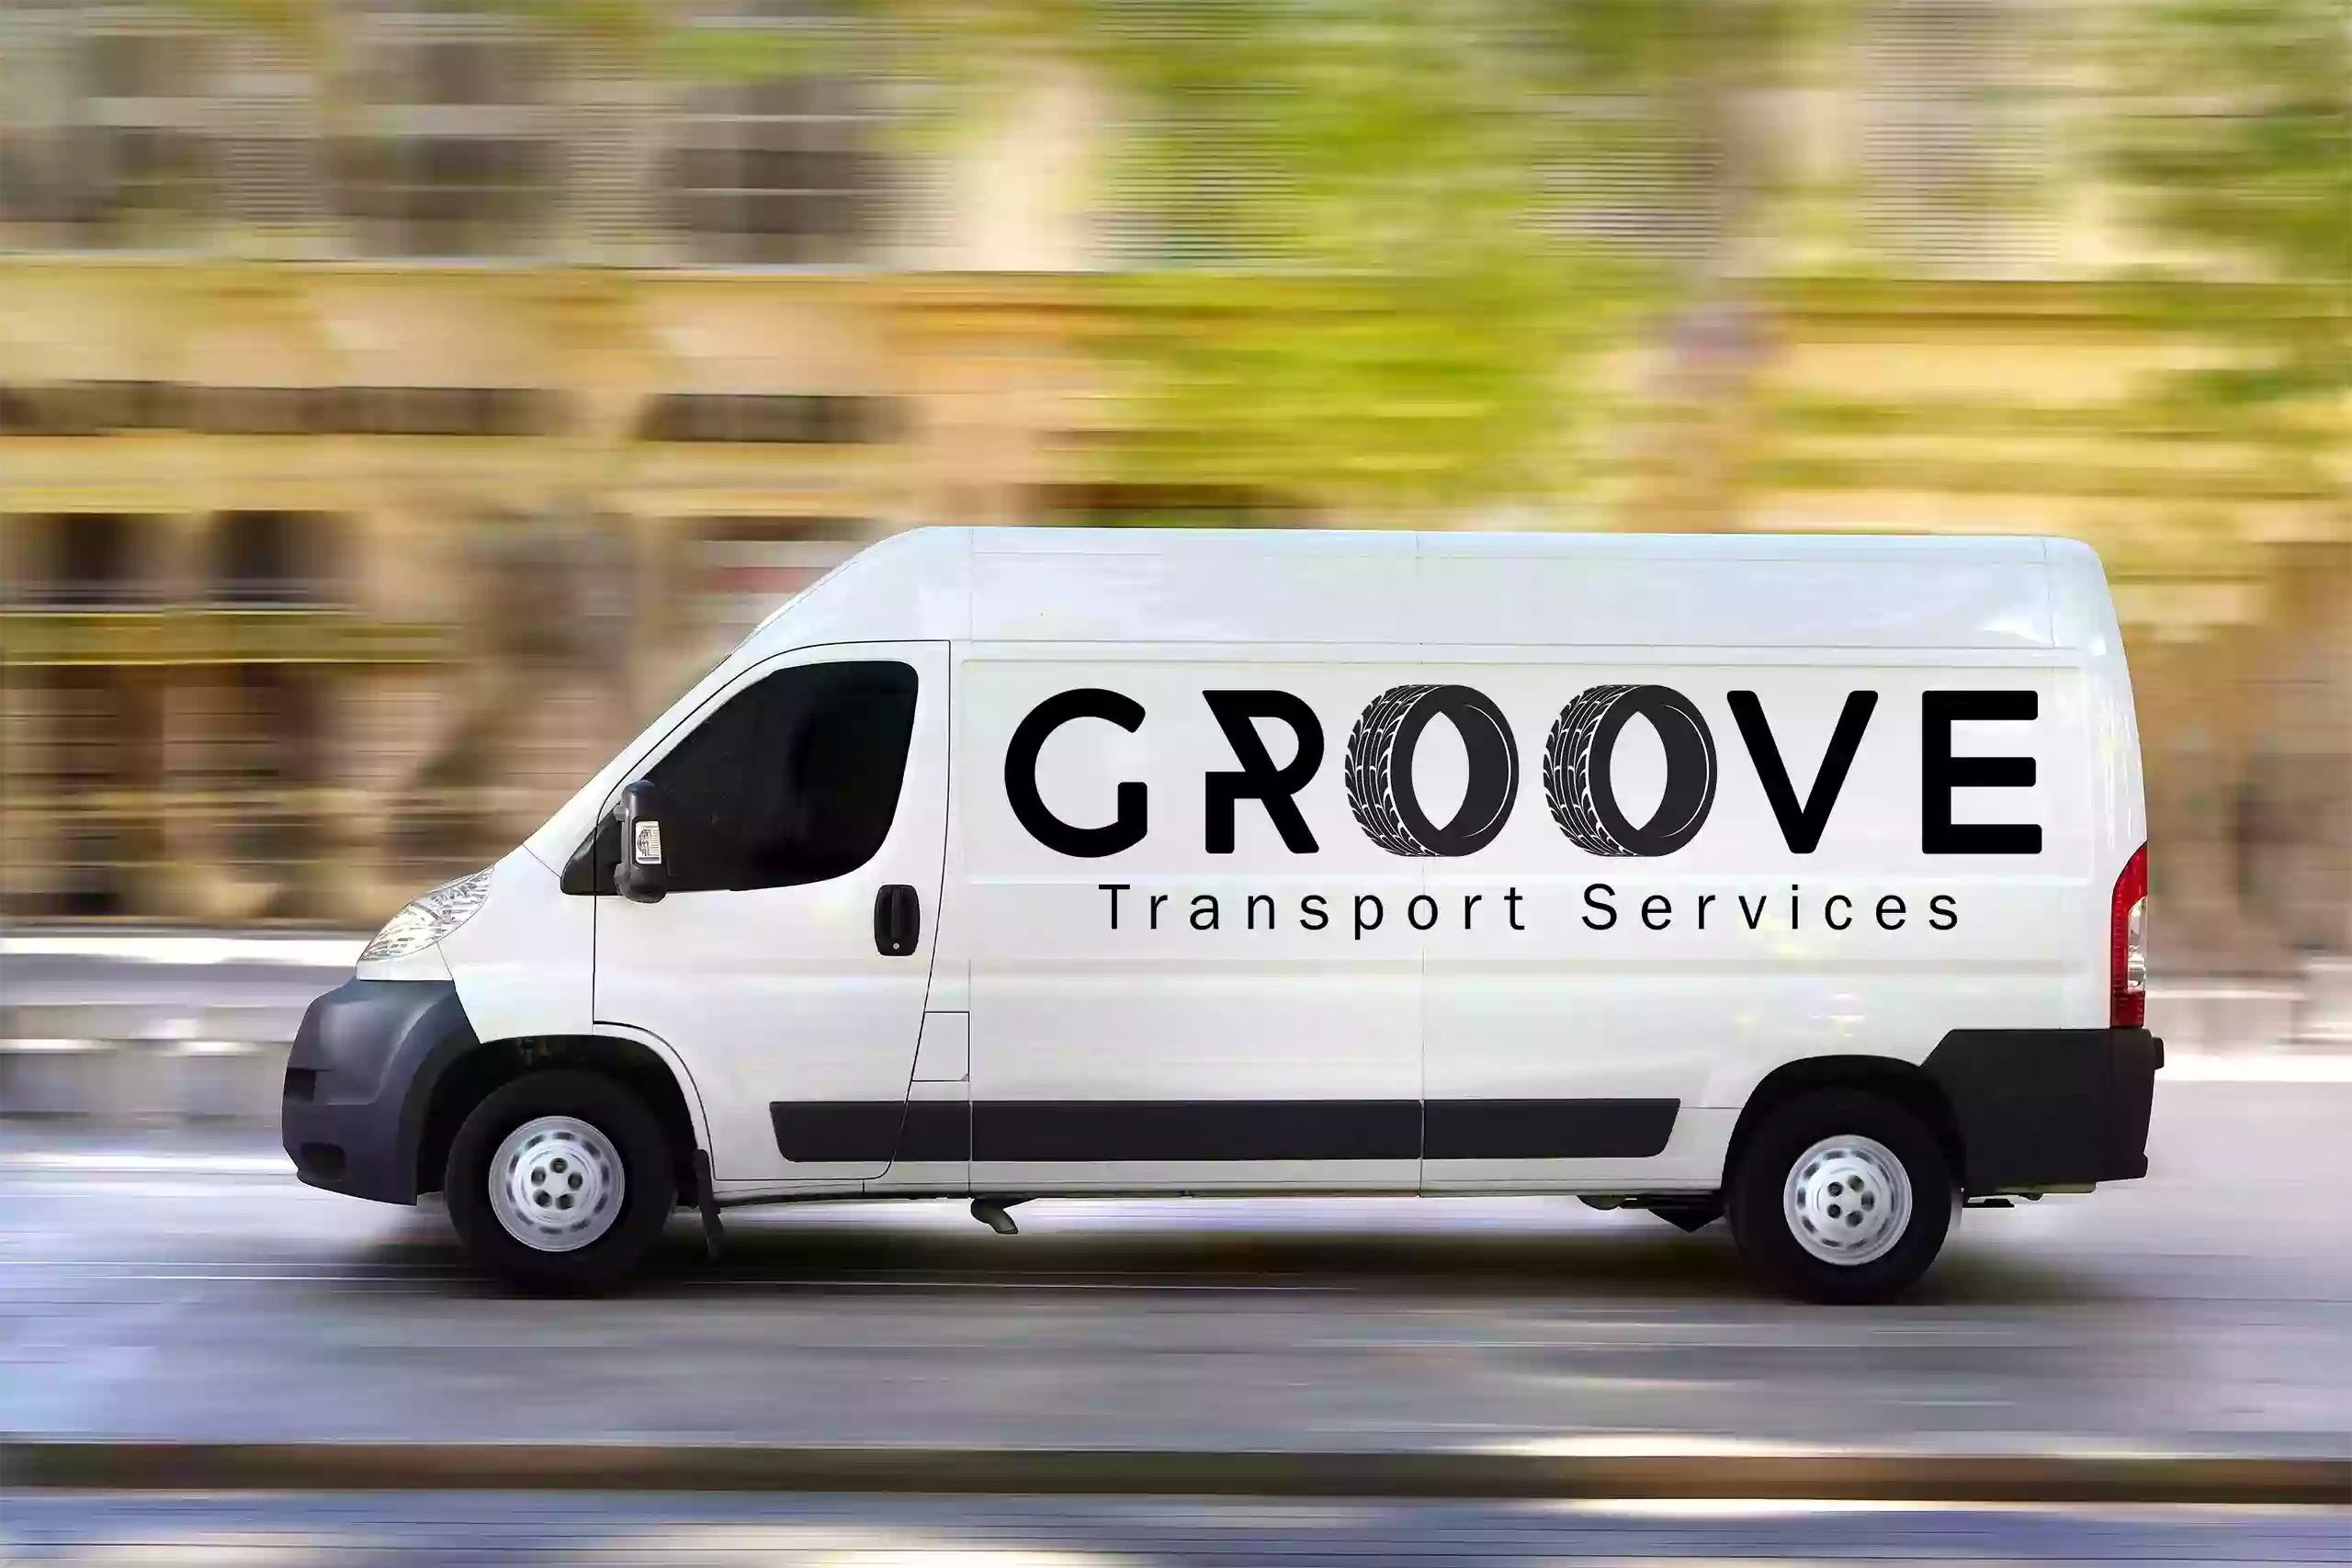 Groove Transport Services